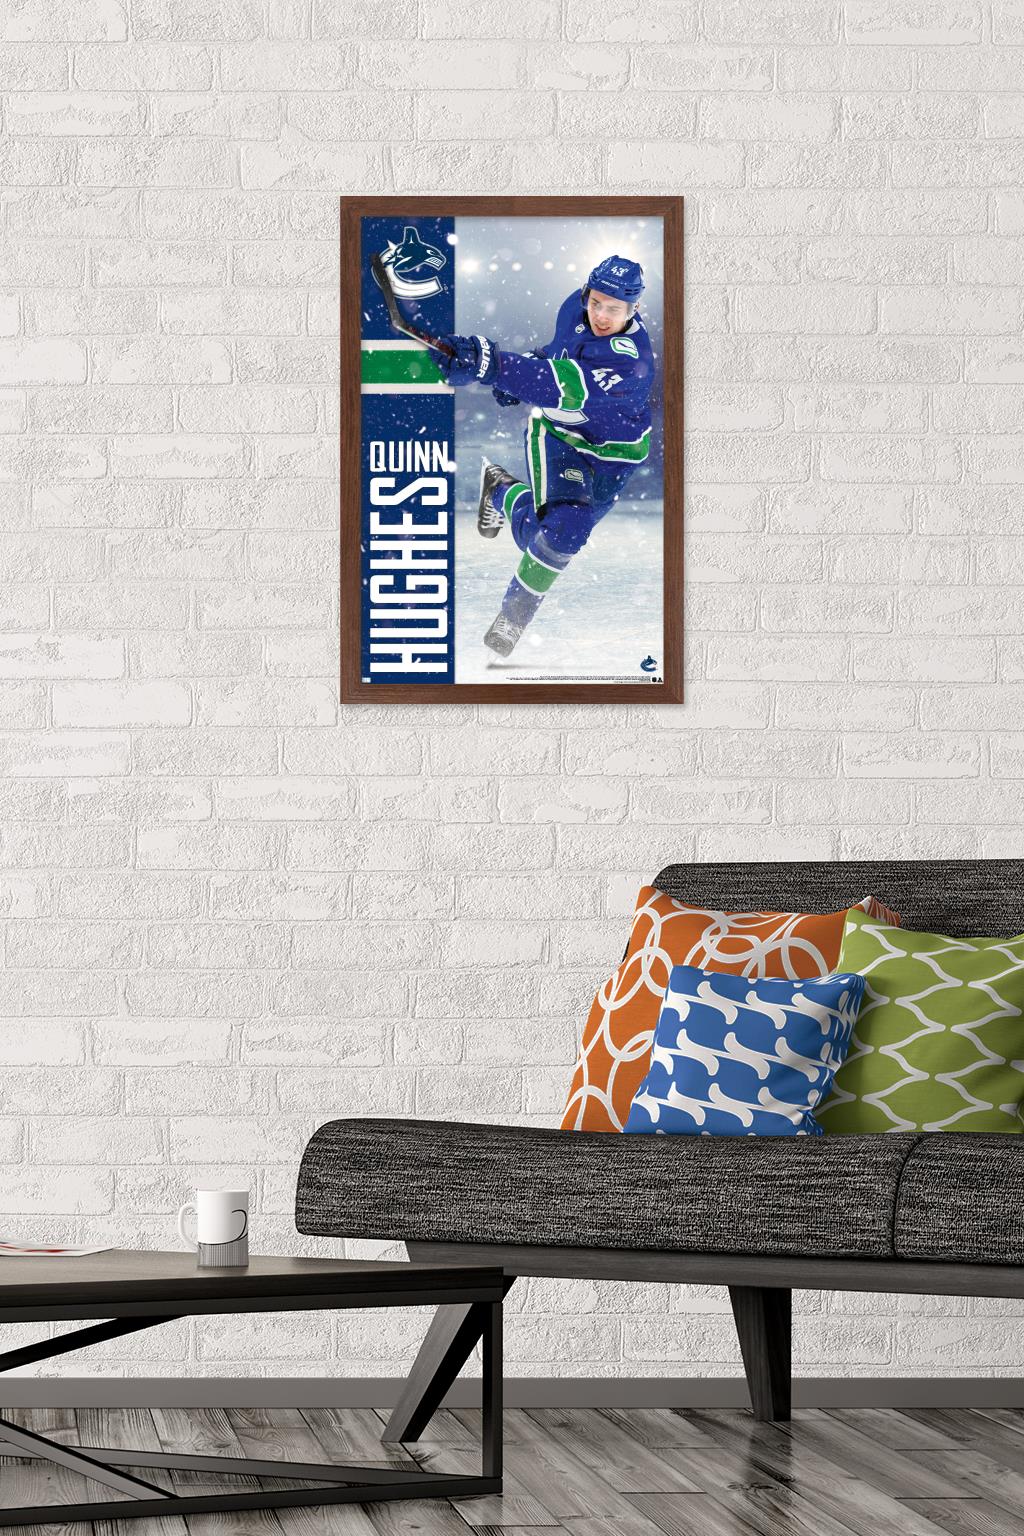 NHL Vancouver Canucks - Quinn Hughes 20 Wall Poster, 14.725" x 22.375", Framed - image 2 of 5